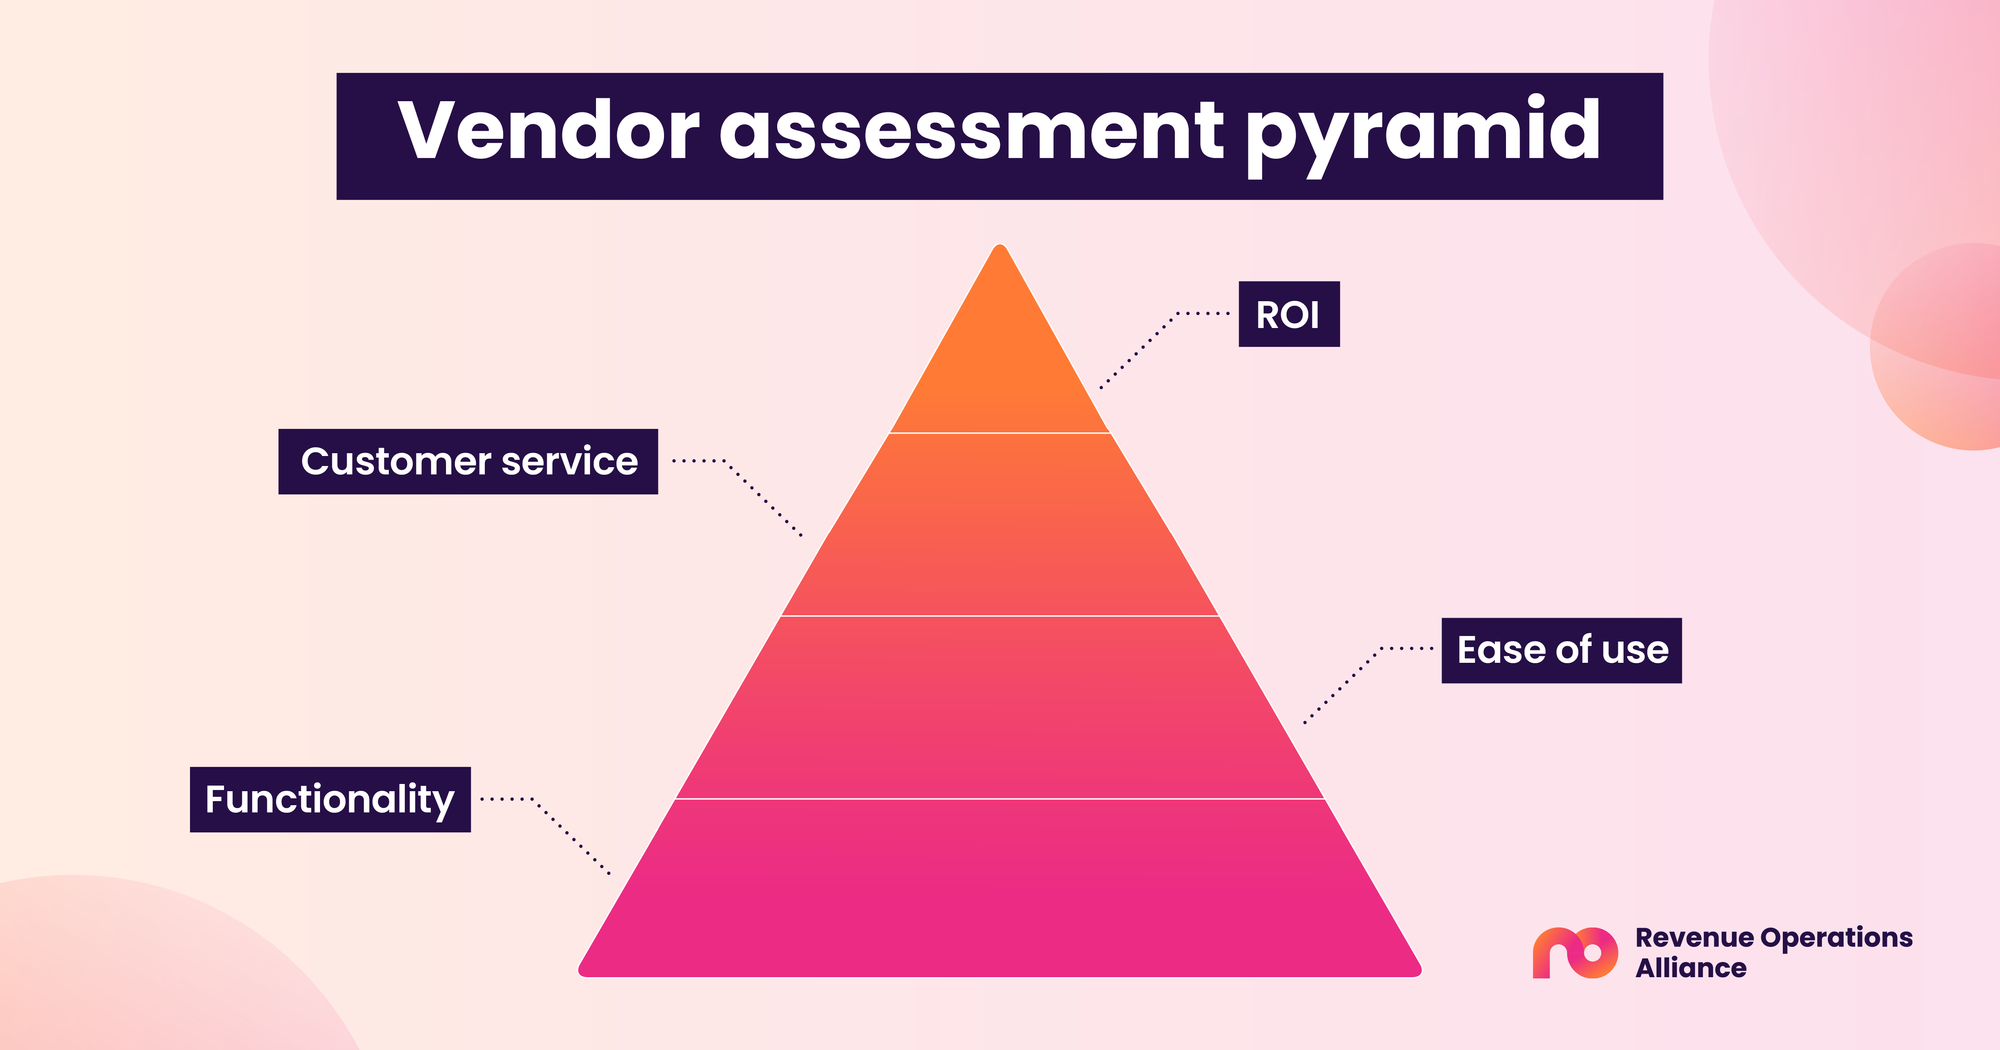 Vendor assessment pyramid: ROI, Customer service, ease of use, functionality